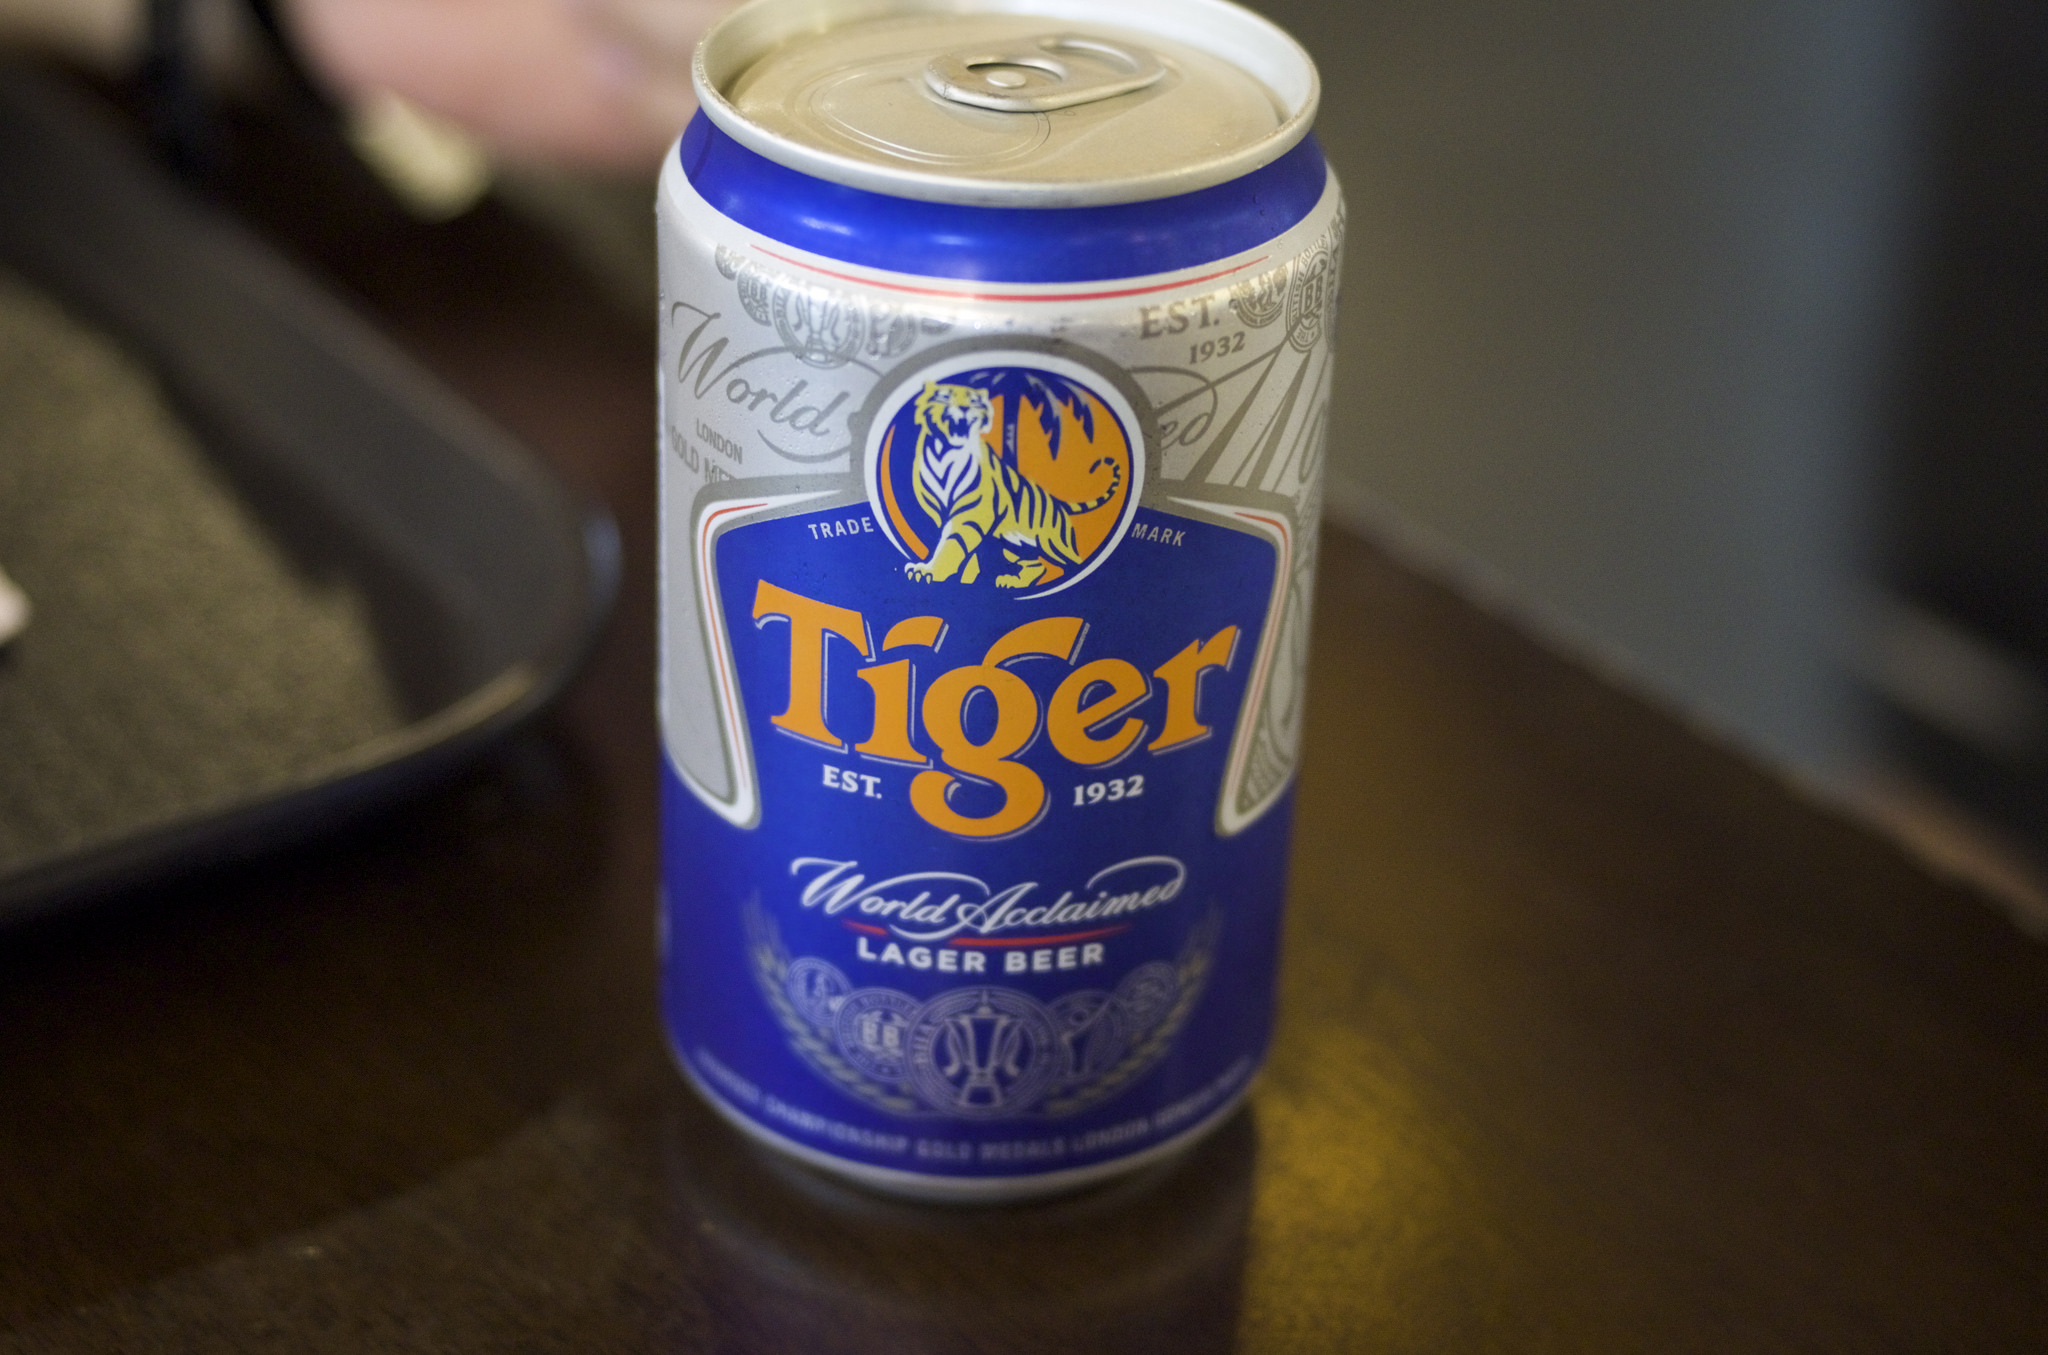 Tiger can